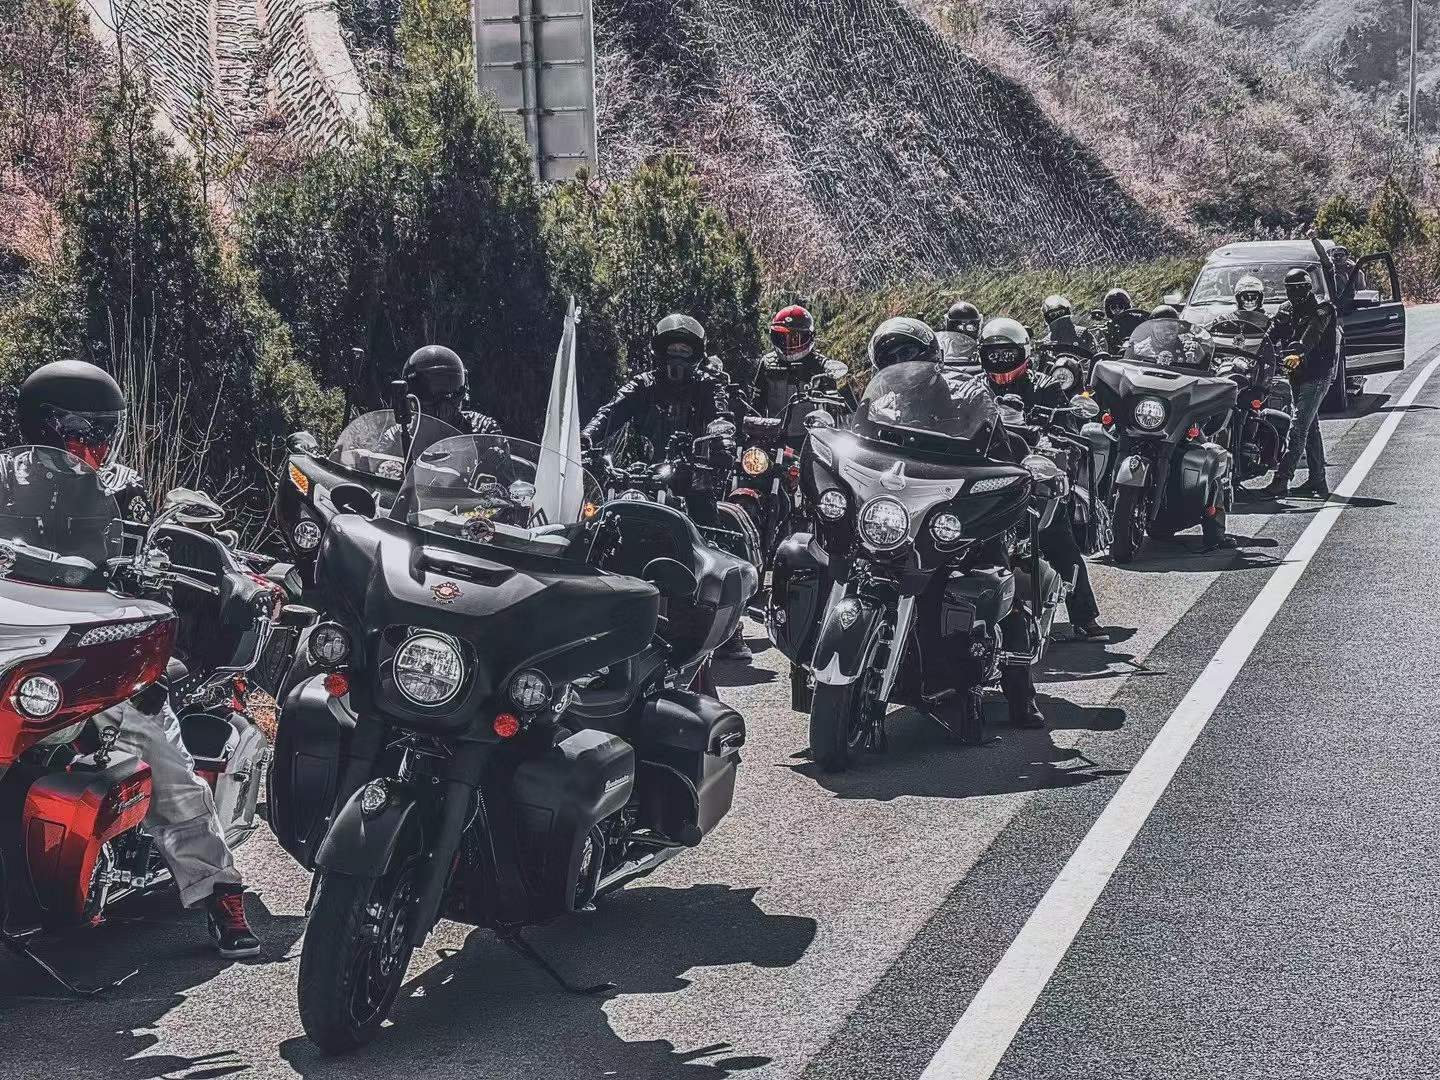 Riding for a Cause: The Heartfelt Tale of Motorcycle Clubs and Charity